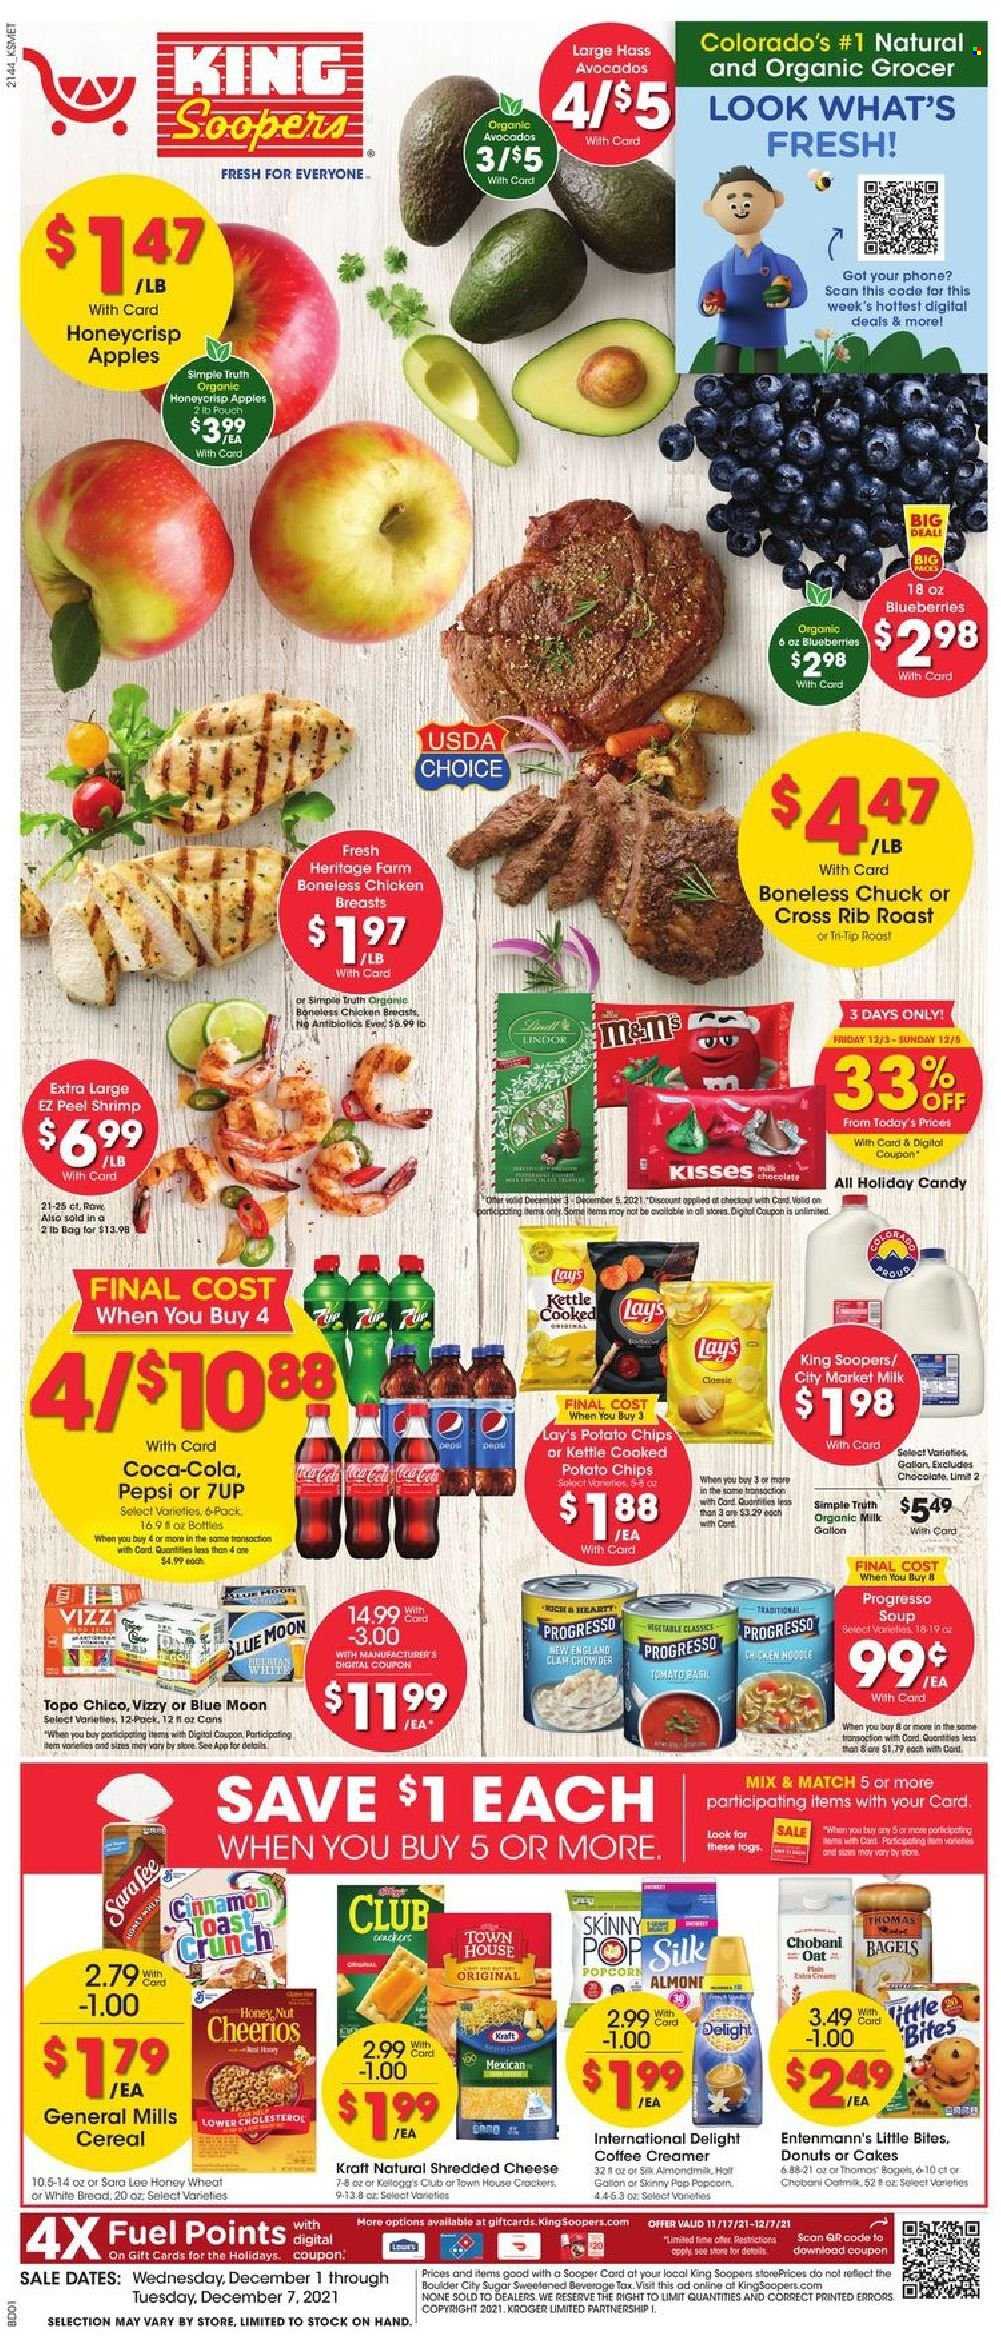 thumbnail - King Soopers Flyer - 12/01/2021 - 12/07/2021 - Sales products - bagels, bread, white bread, cake, donut, Entenmann's, apples, avocado, blueberries, shrimps, soup, Progresso, Kraft®, shredded cheese, Chobani, organic milk, creamer, chocolate, Lindor, crackers, Little Bites, potato chips, chips, Lay’s, popcorn, Skinny Pop, sugar, oats, cereals, Cheerios, Coca-Cola, Pepsi, 7UP, L'Or, beer, chicken breasts, Lee, Blue Moon. Page 1.